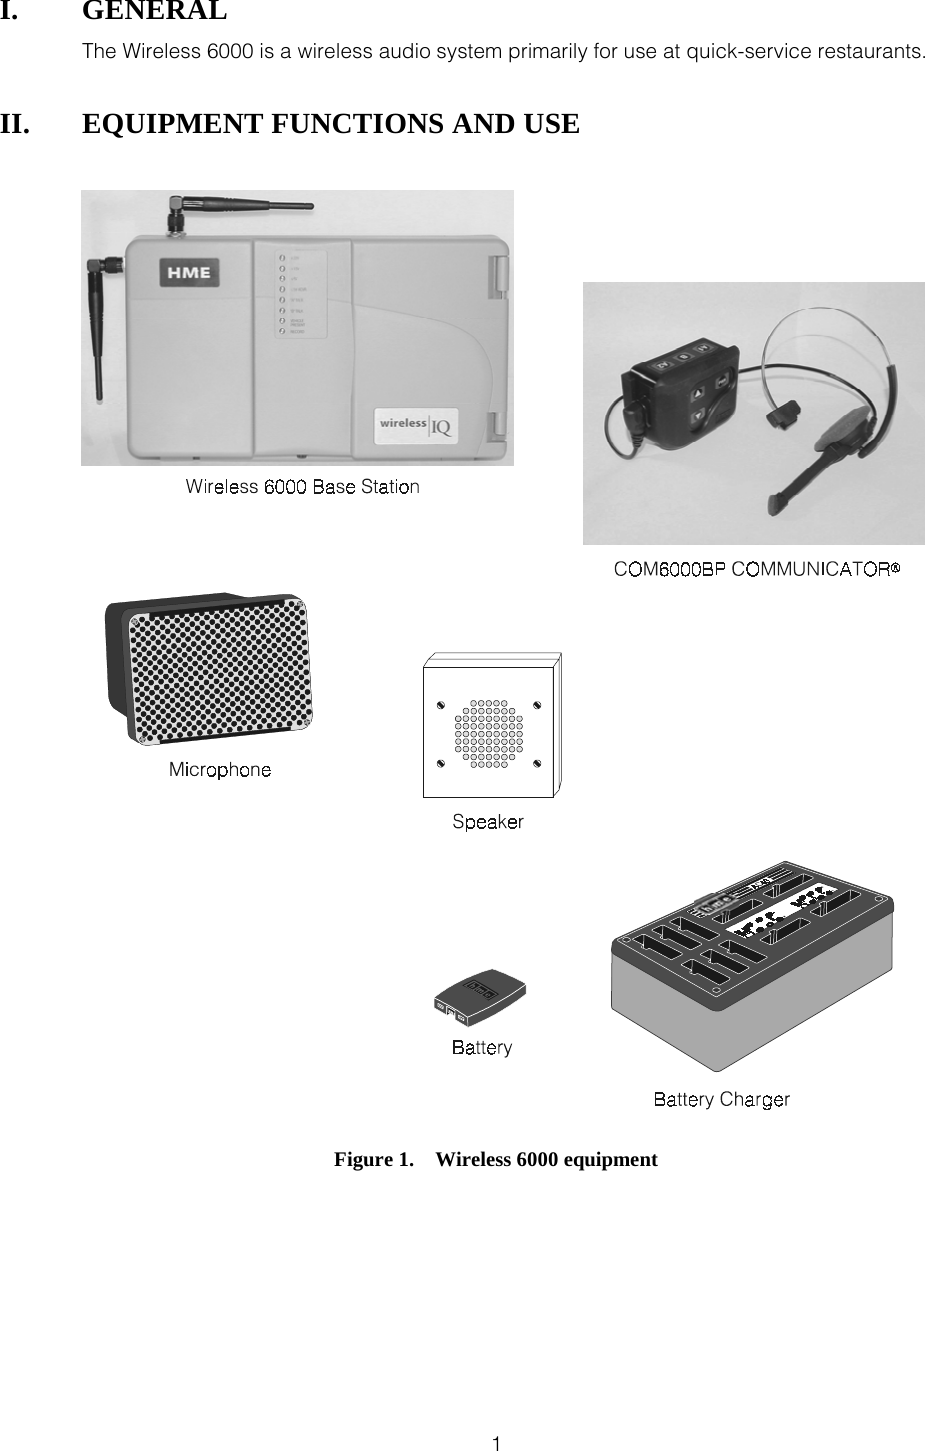  1 I. GENERAL The Wireless 6000 is a wireless audio system primarily for use at quick-service restaurants. II.  EQUIPMENT FUNCTIONS AND USE    Figure 1.    Wireless 6000 equipment 